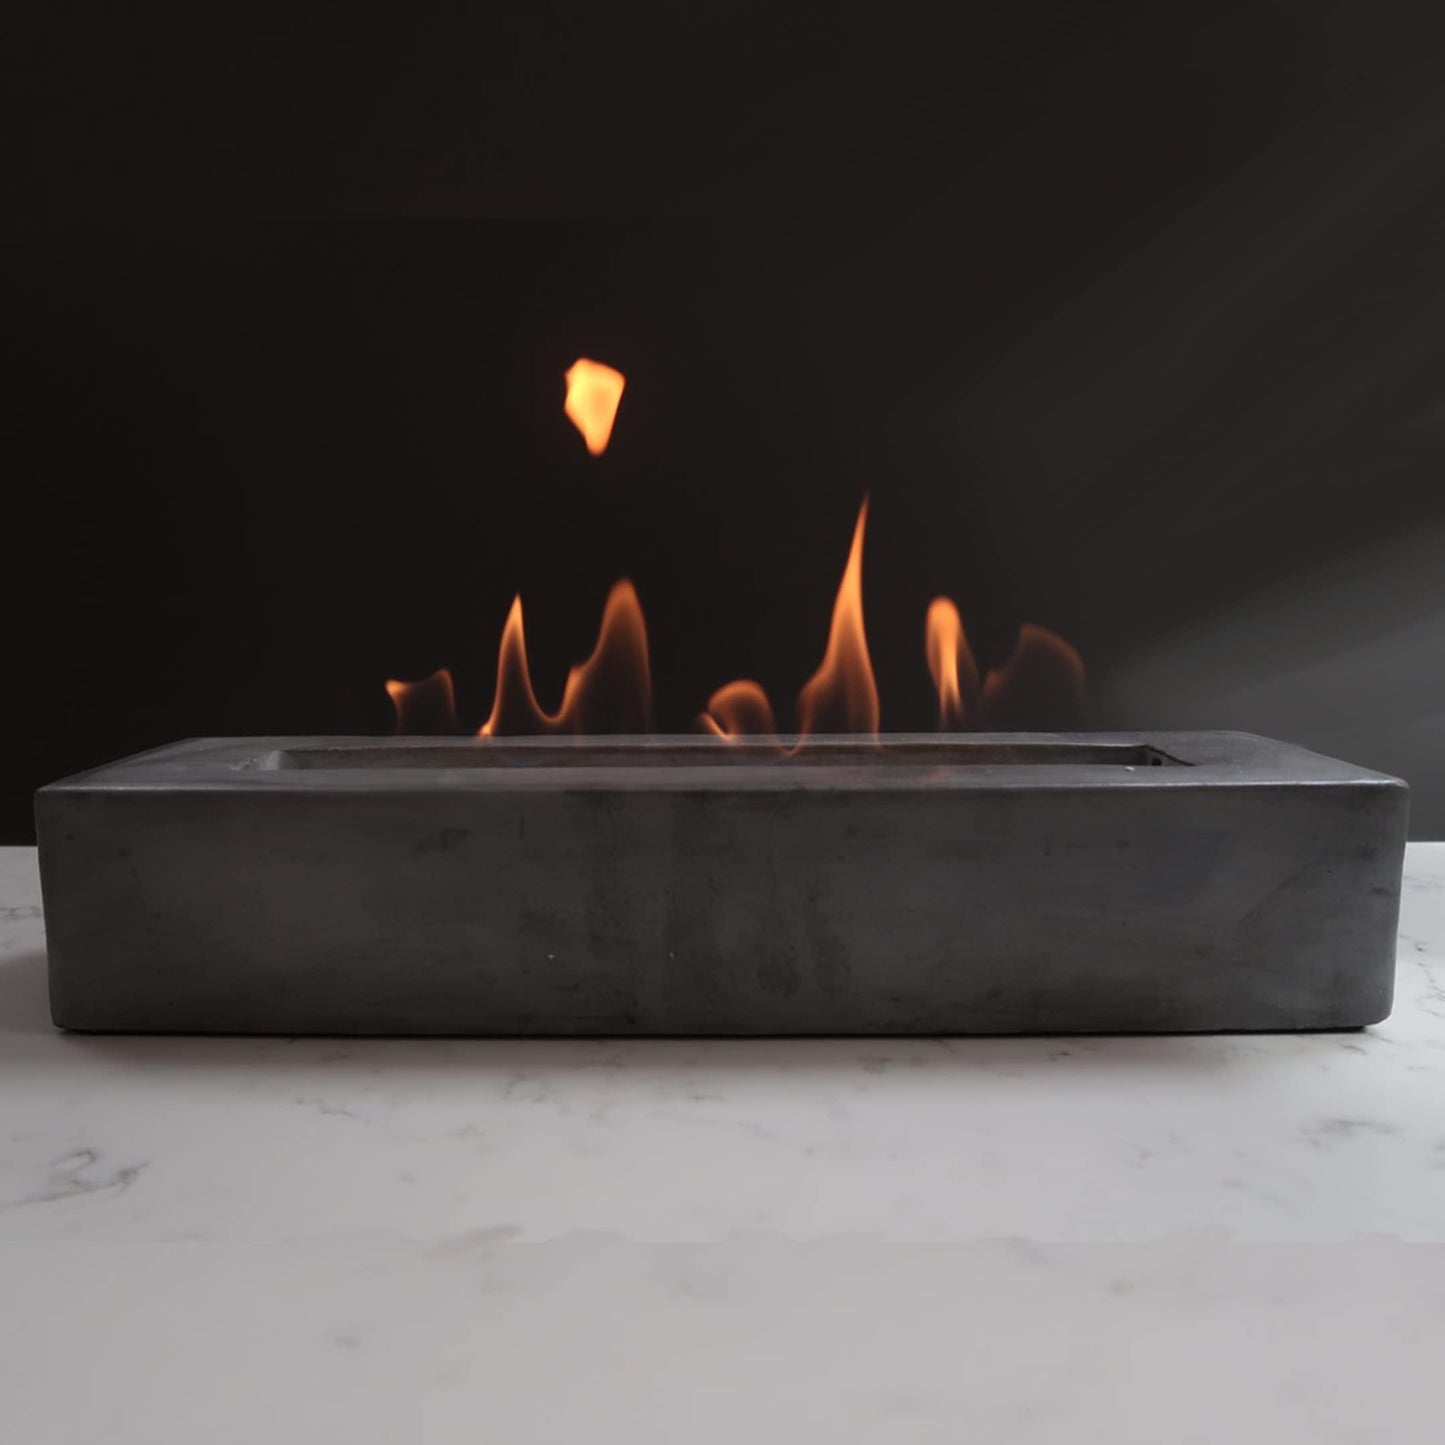 ROUNDFIRE Large Rectange Classic Tabletop Fire Pit, Portable Fire Pit, Table Top Firepit, Small Table Top Fire Pit Bowl, Fire Pit Tabletop, Mini Fireplace, Ethanol Smores Maker, Indoor & Outdoor. - CookCave